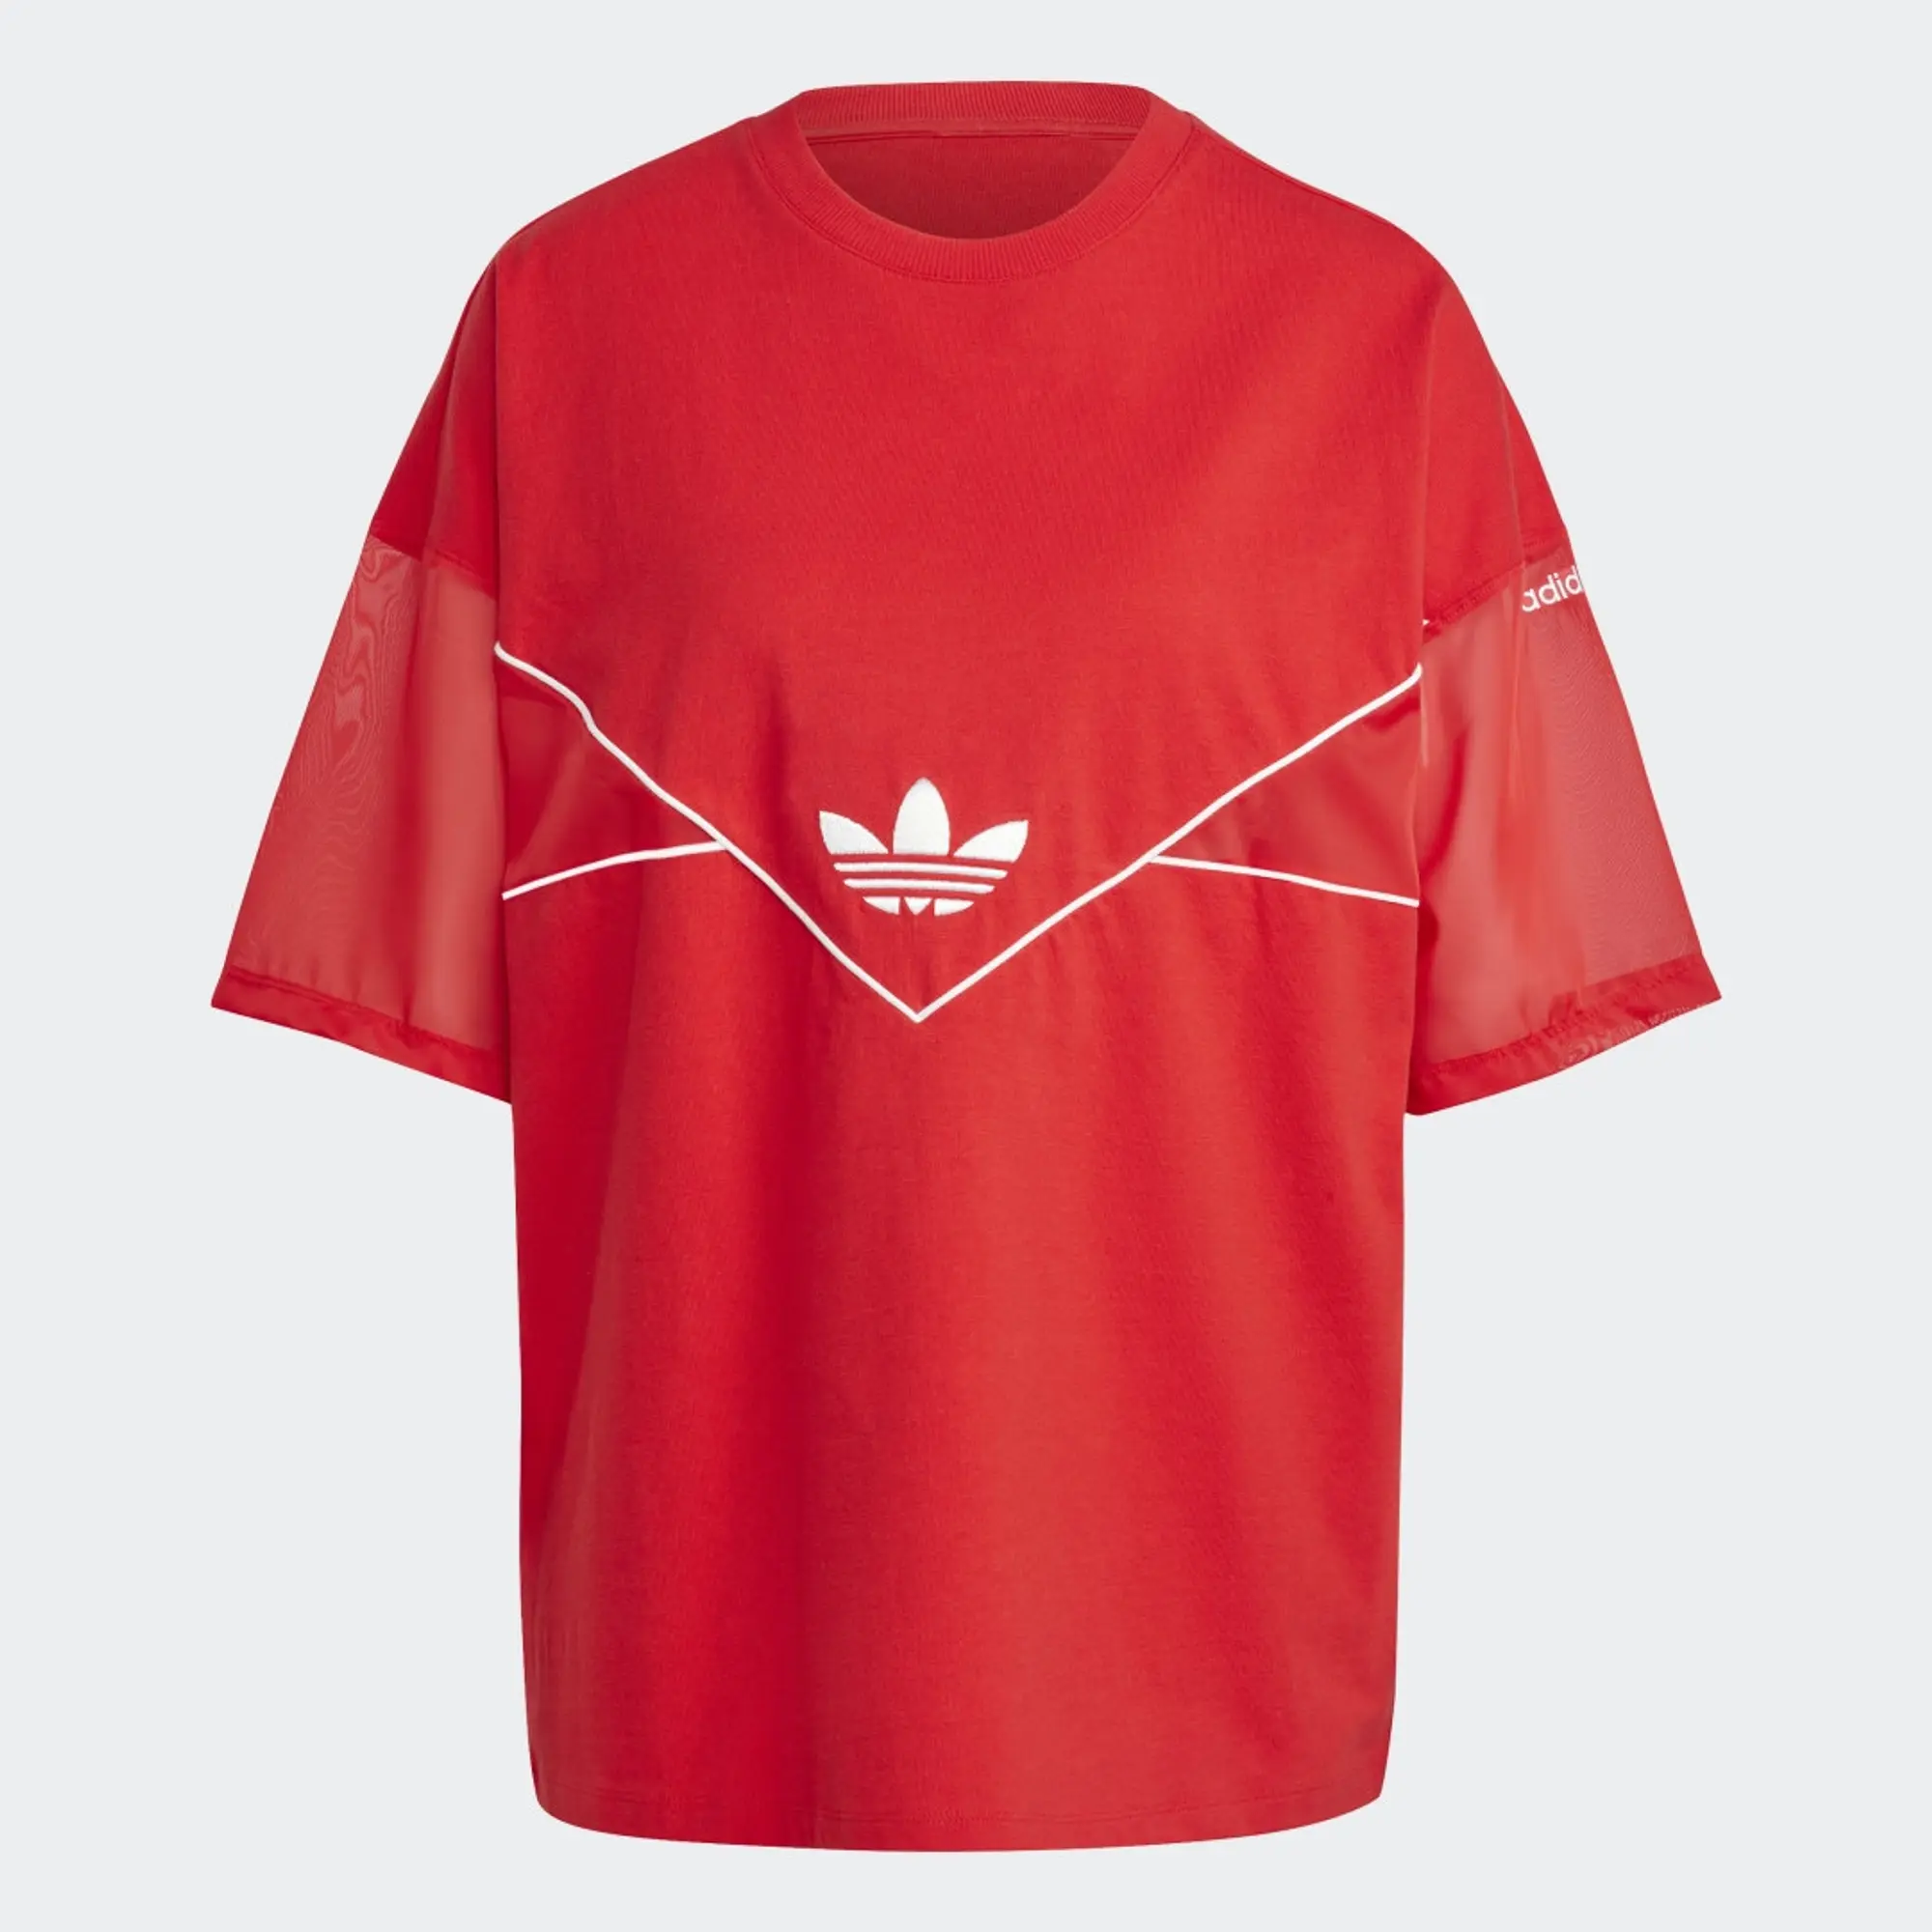 Stand Out In Adidas Style The IC5387 With T-shirt | Originls